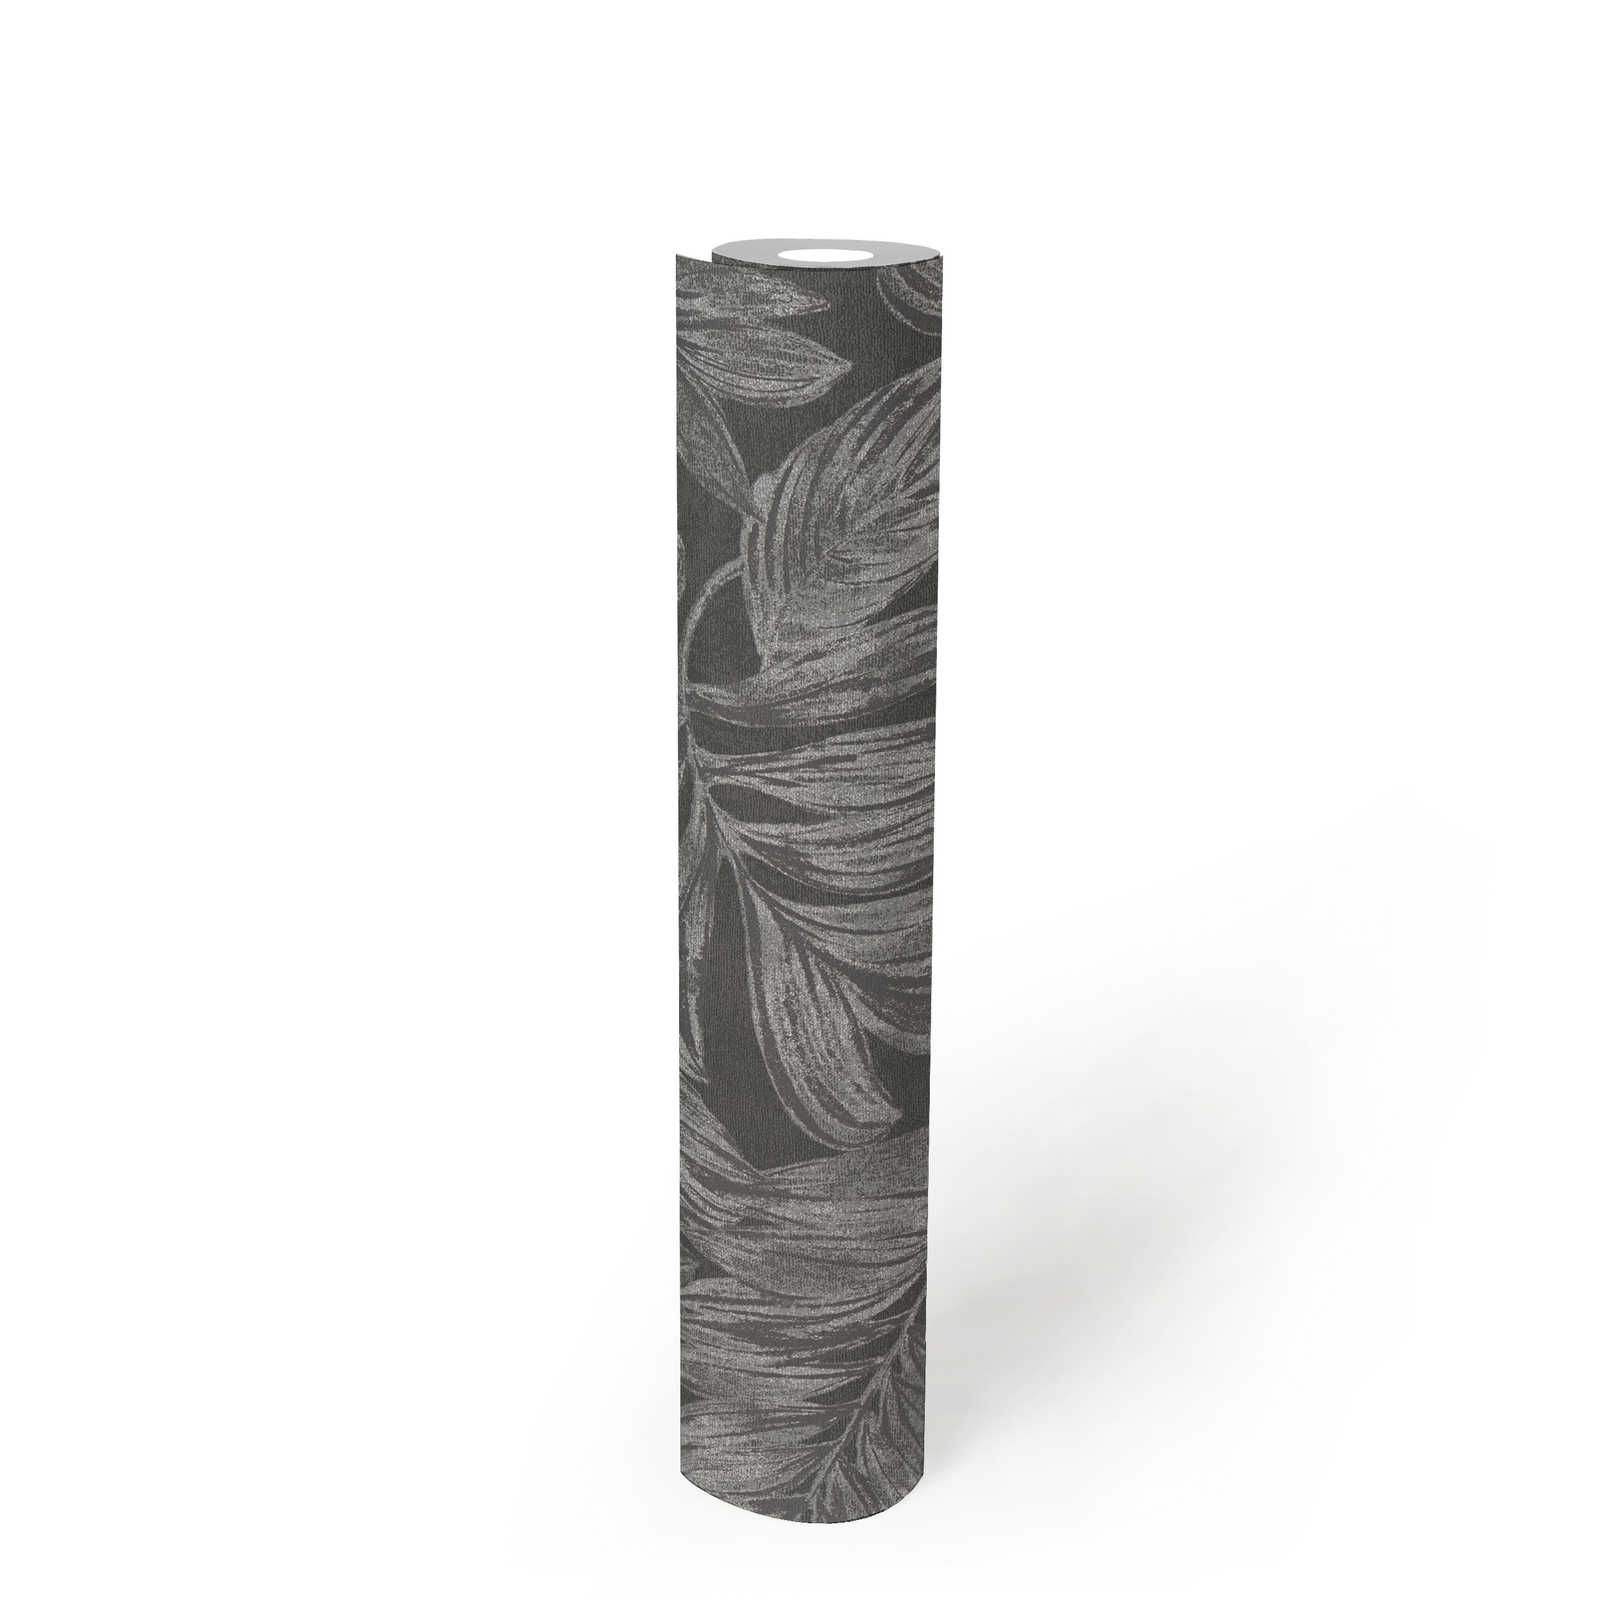             Floral non-woven wallpaper with jungle pattern - anthracite, grey, silver
        